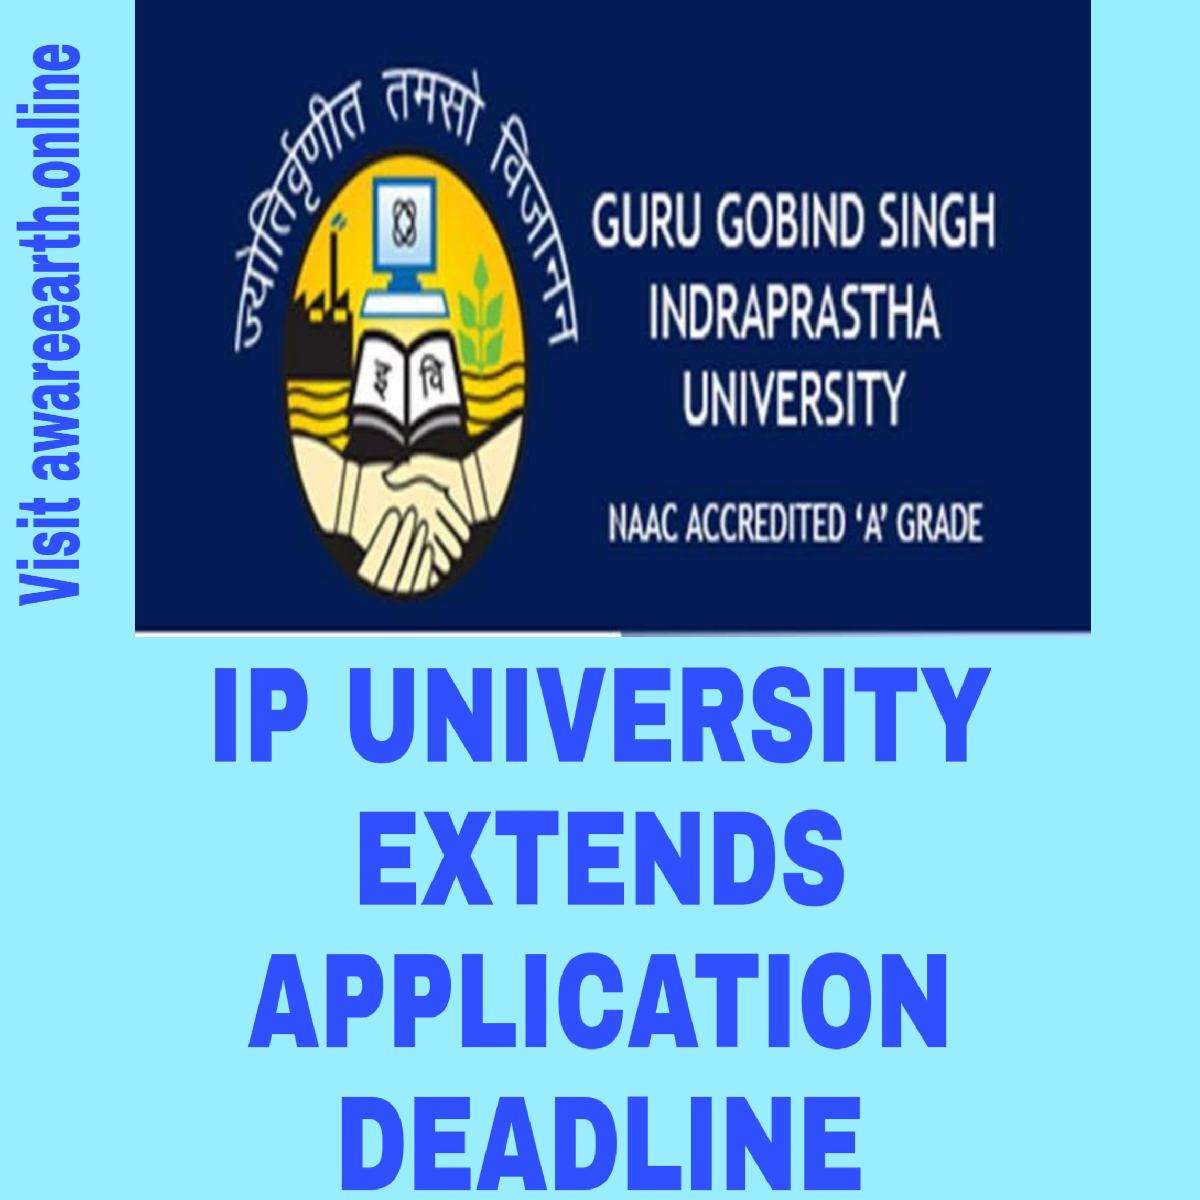 IP University Extends Admission Application Deadline to July 2020